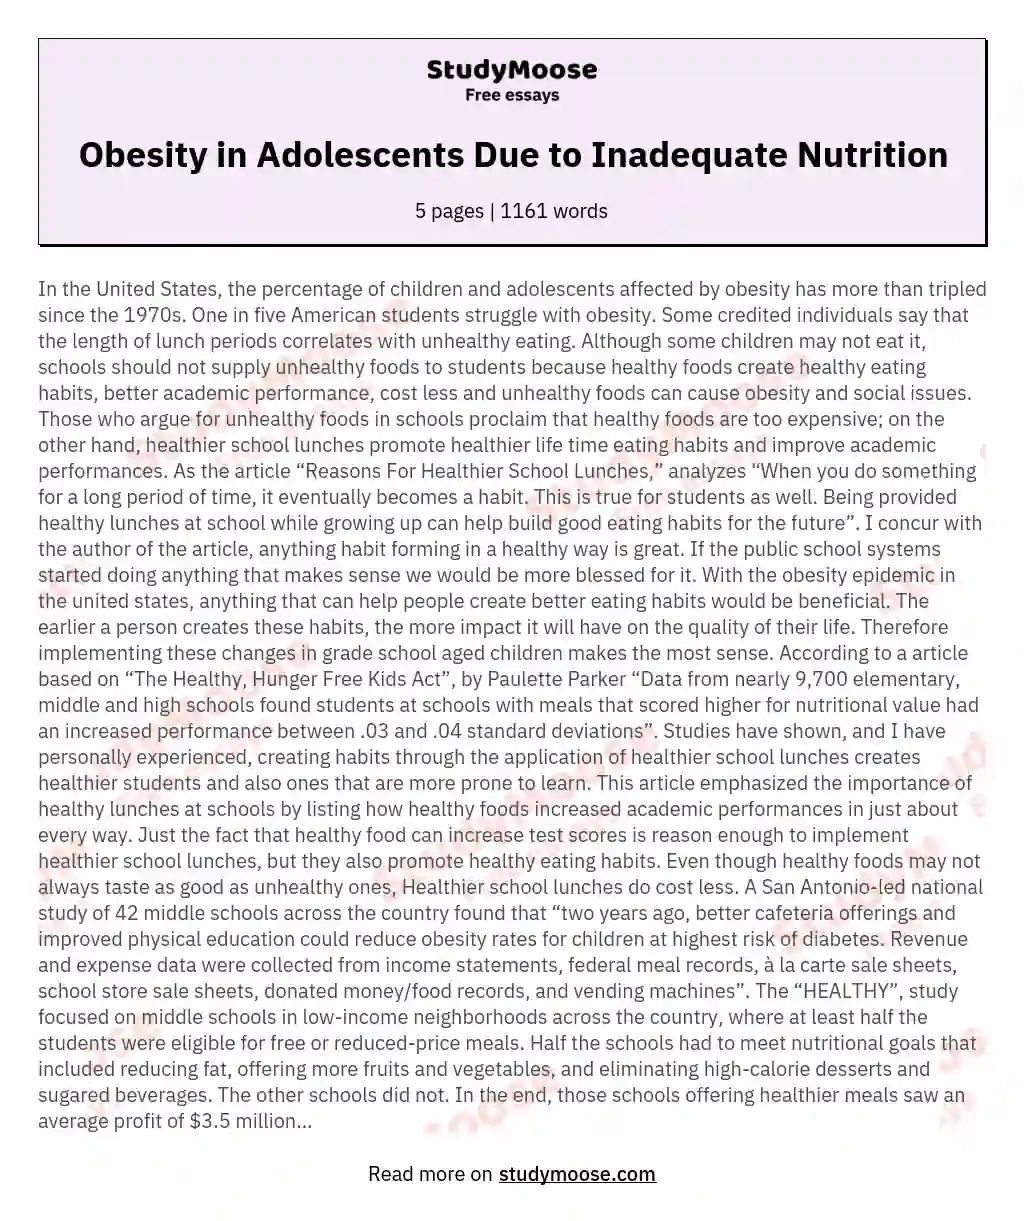 Obesity in Adolescents Due to Inadequate Nutrition essay